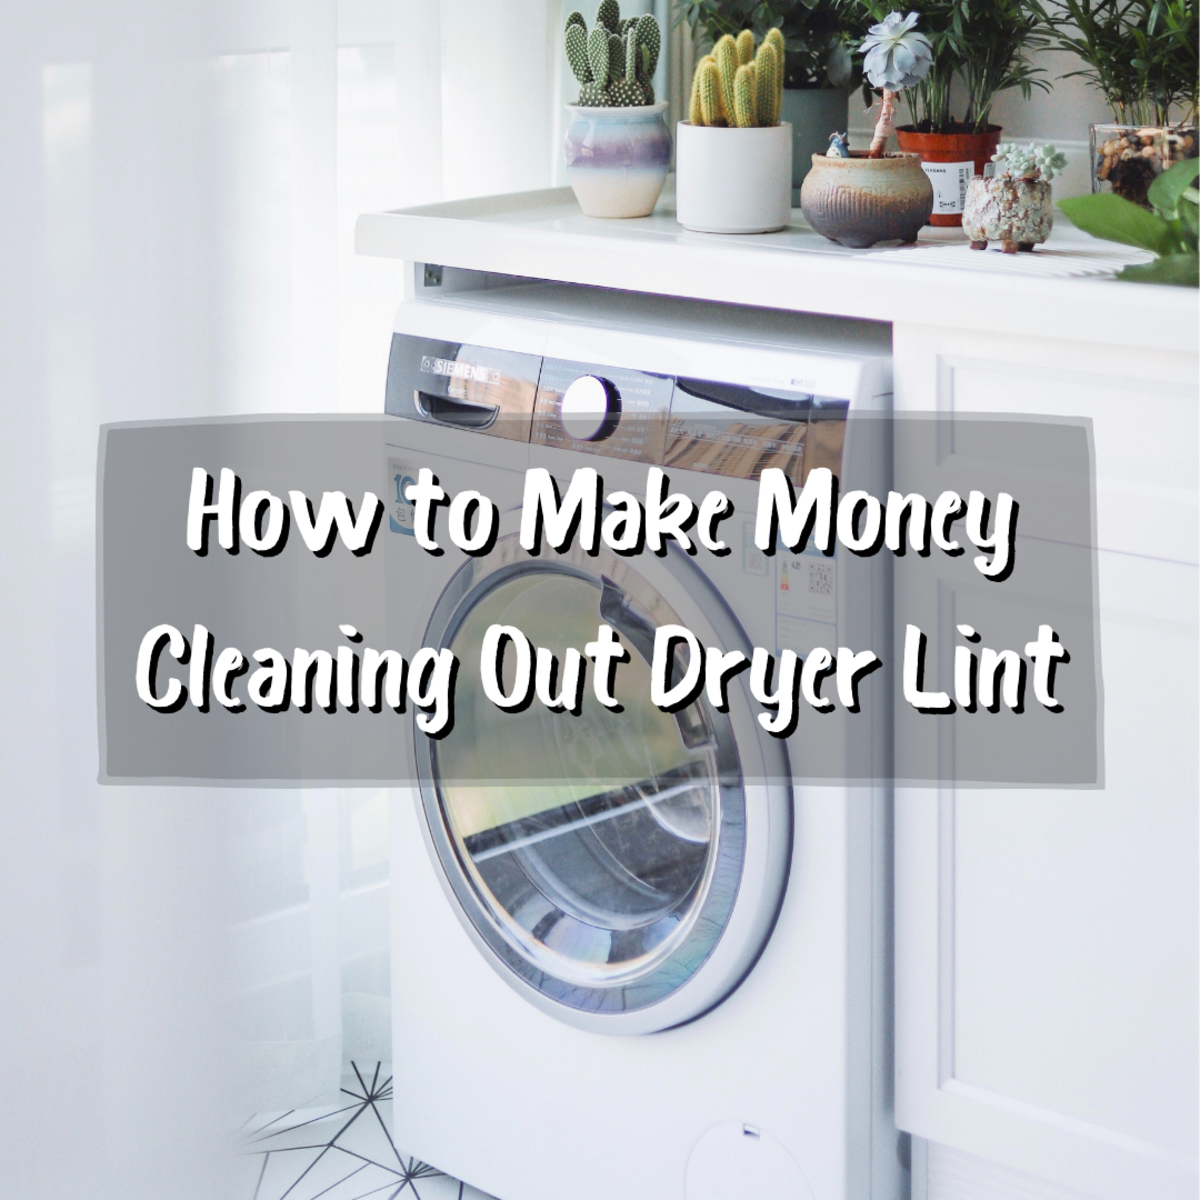 How to Make Money Cleaning Out Dryer Lint